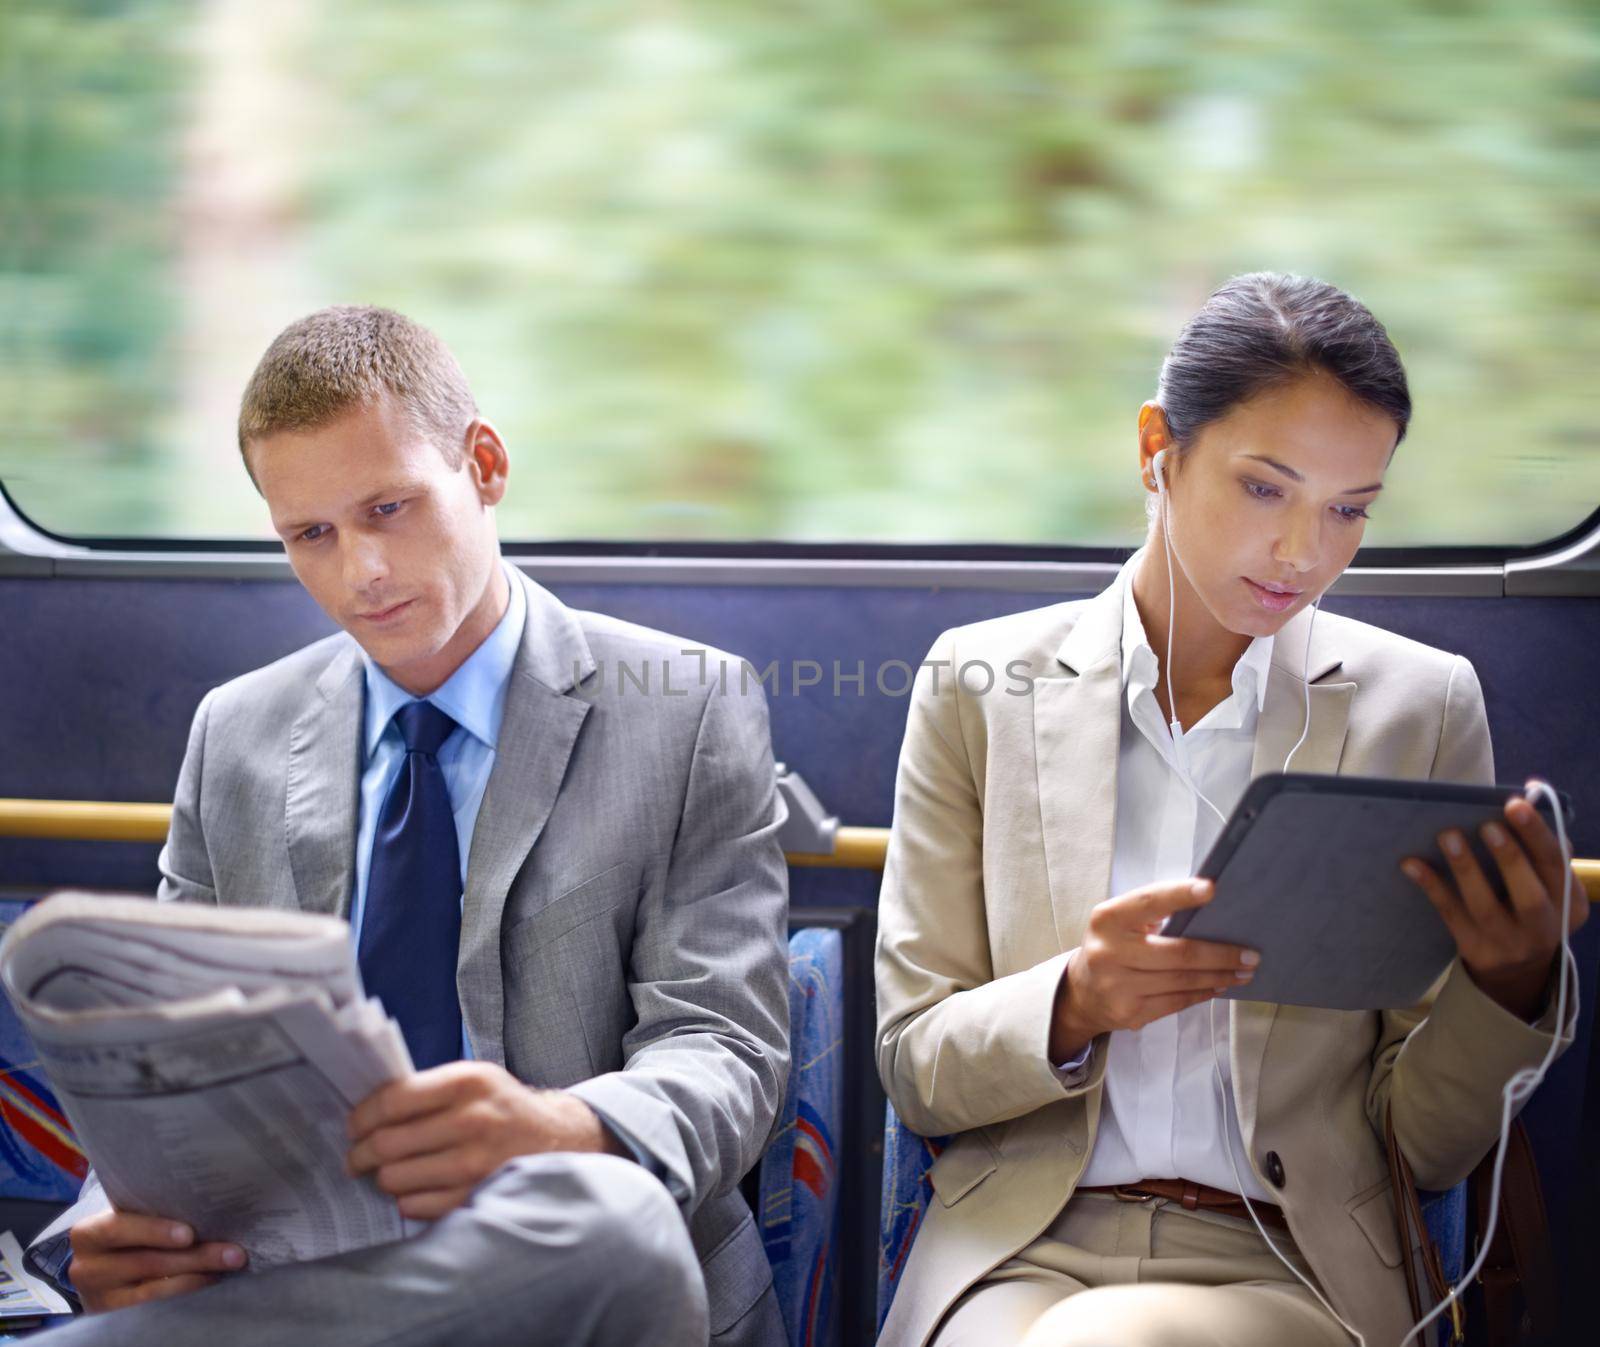 Two business people reading catching up on the news on their commute to work.